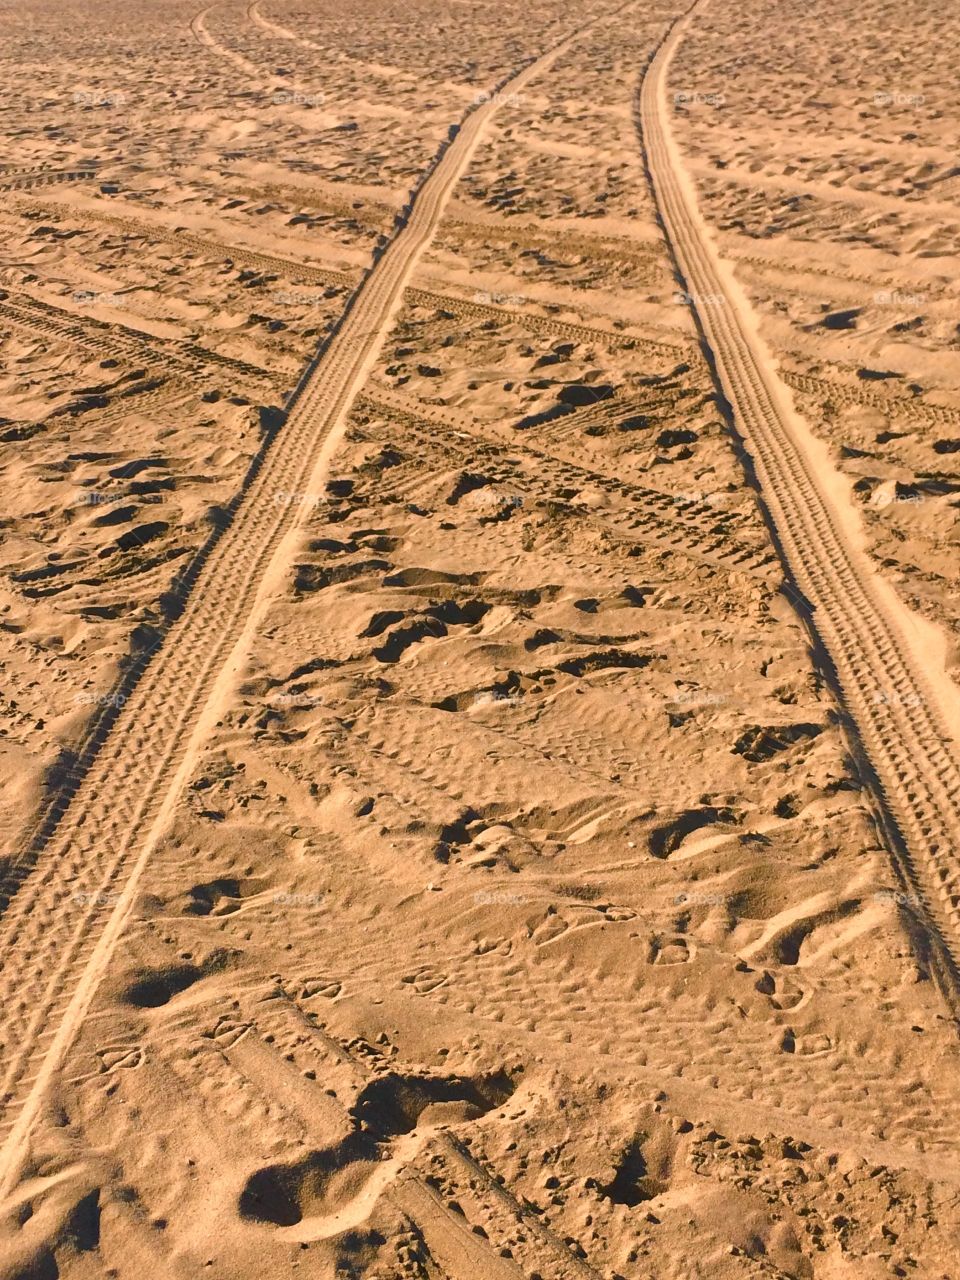 Tyre tracks on the sand